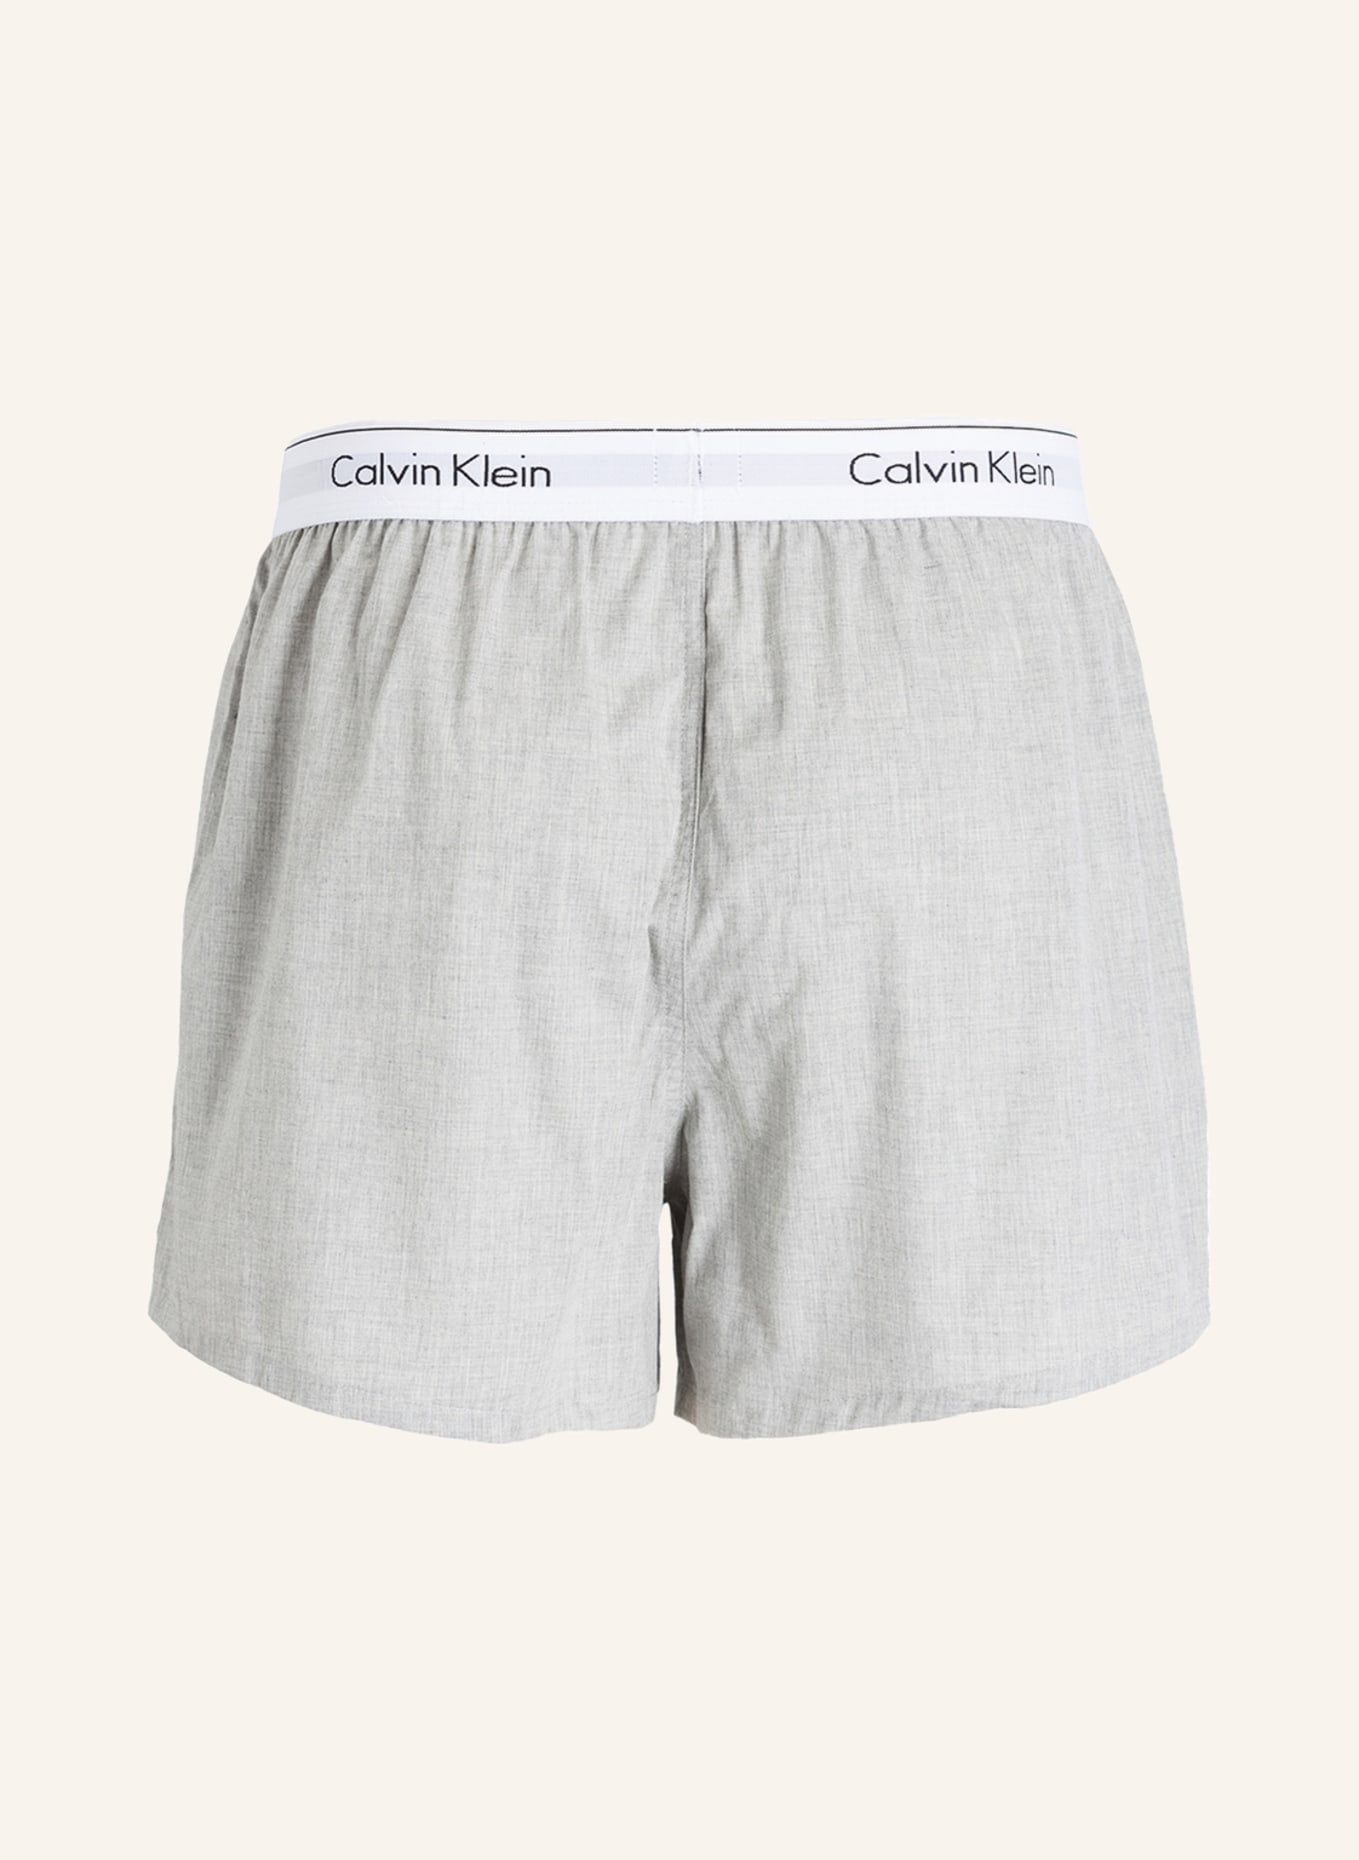 Calvin Klein 2-pack of woven boxer shorts Modern COTTON STRETCH, Color: LIGHT GRAY/ BLACK (Image 2)